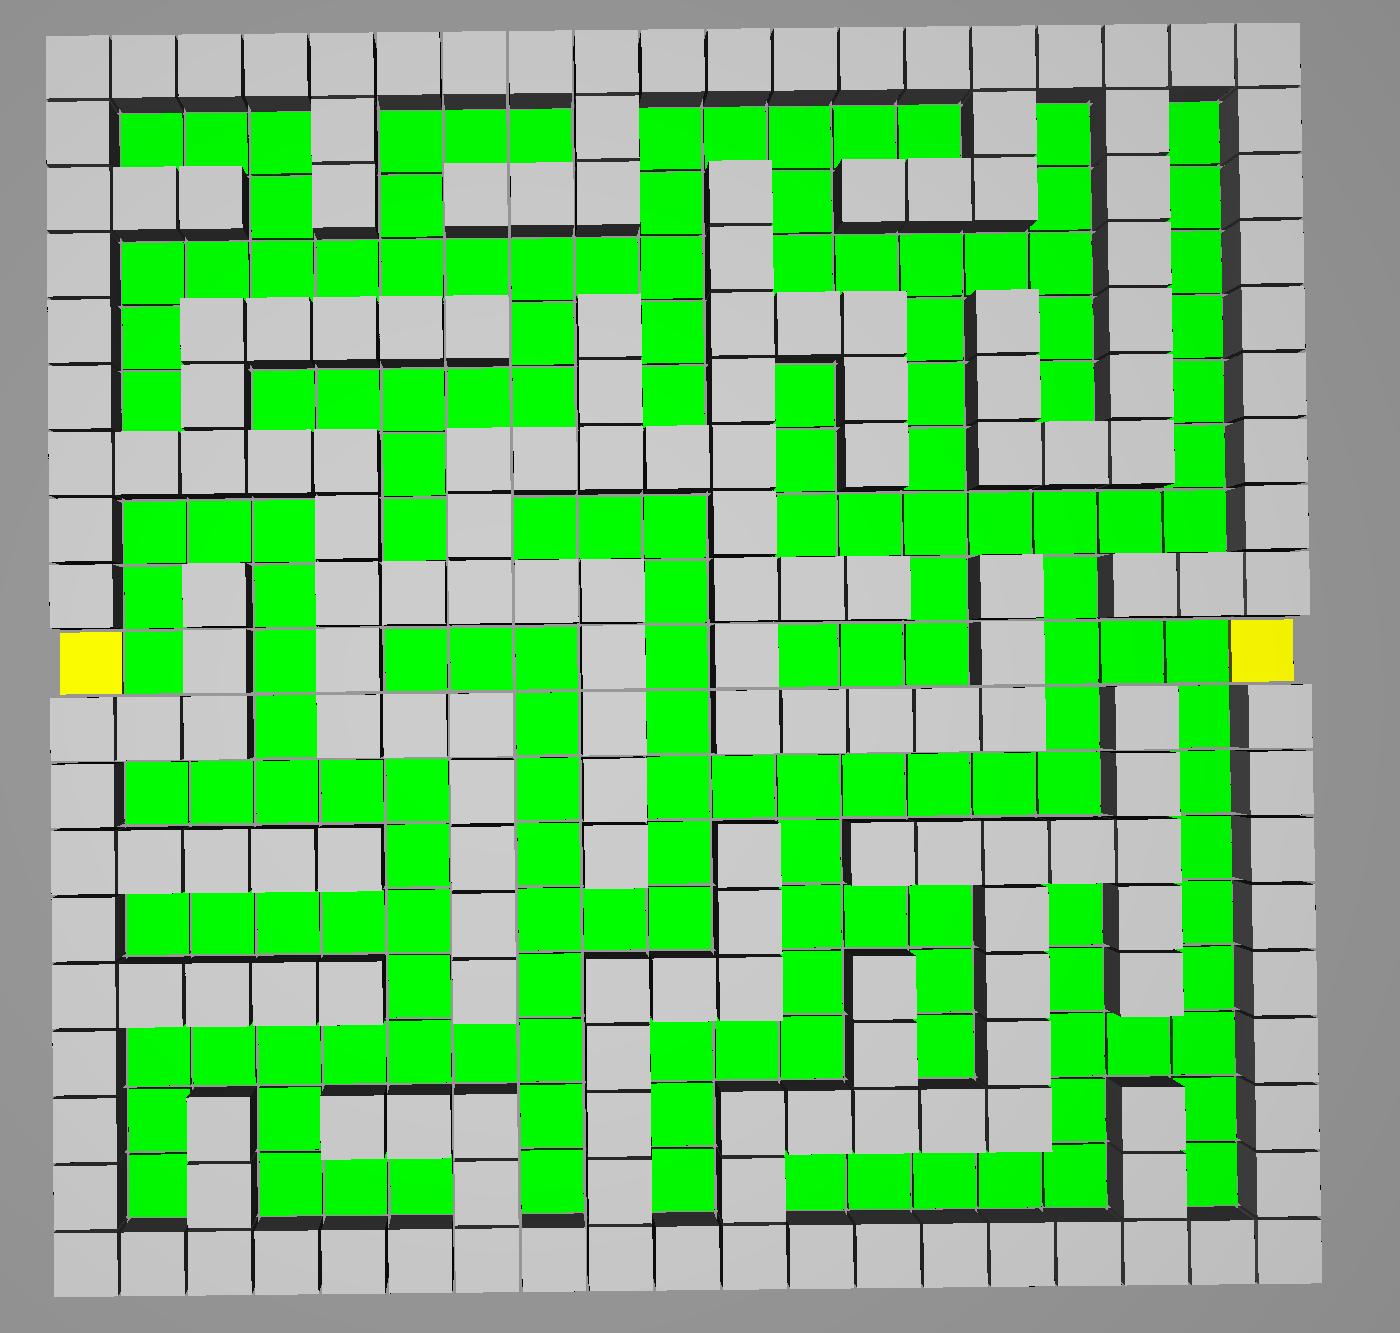 Maze without holes